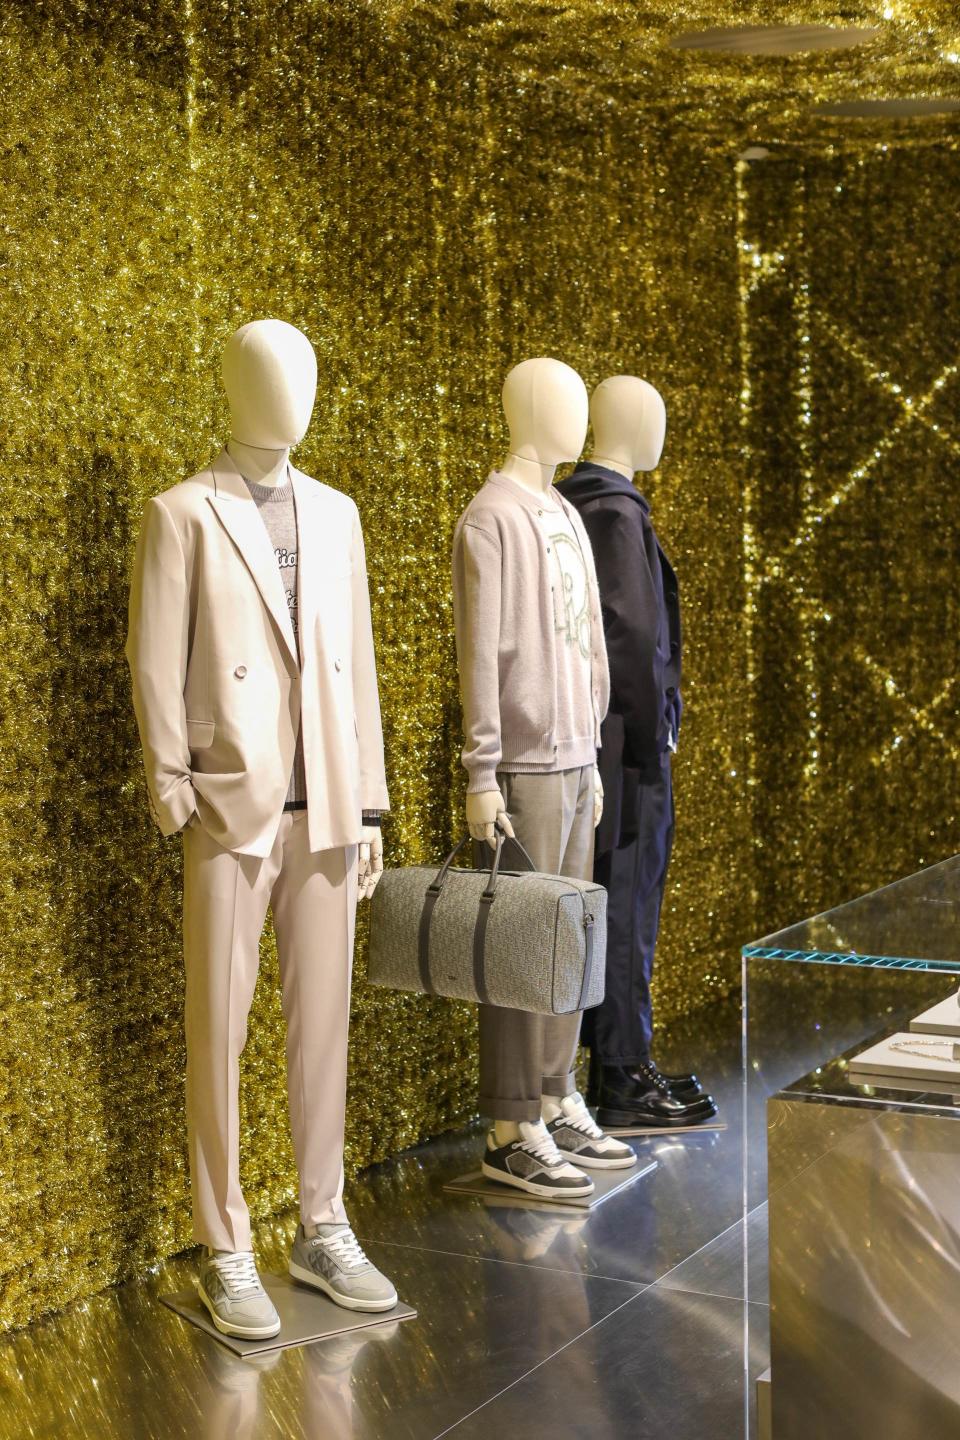 The Dior men’s 2023 collection at the Zhangyuan pop-up.